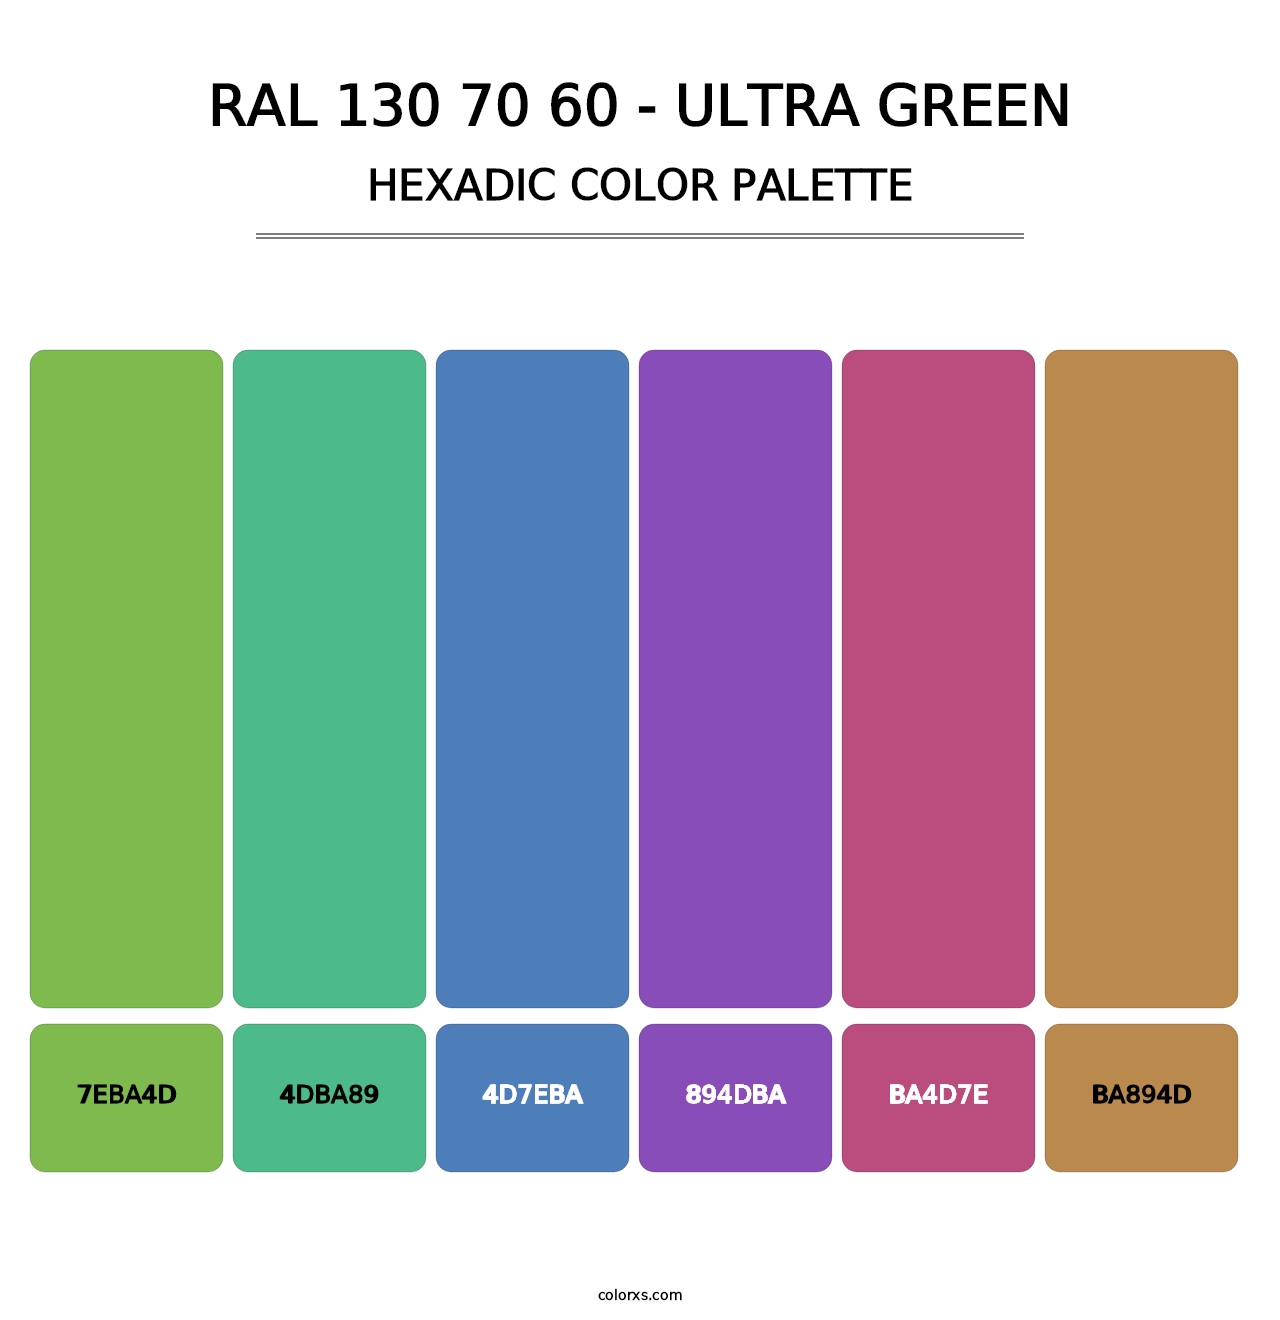 RAL 130 70 60 - Ultra Green - Hexadic Color Palette